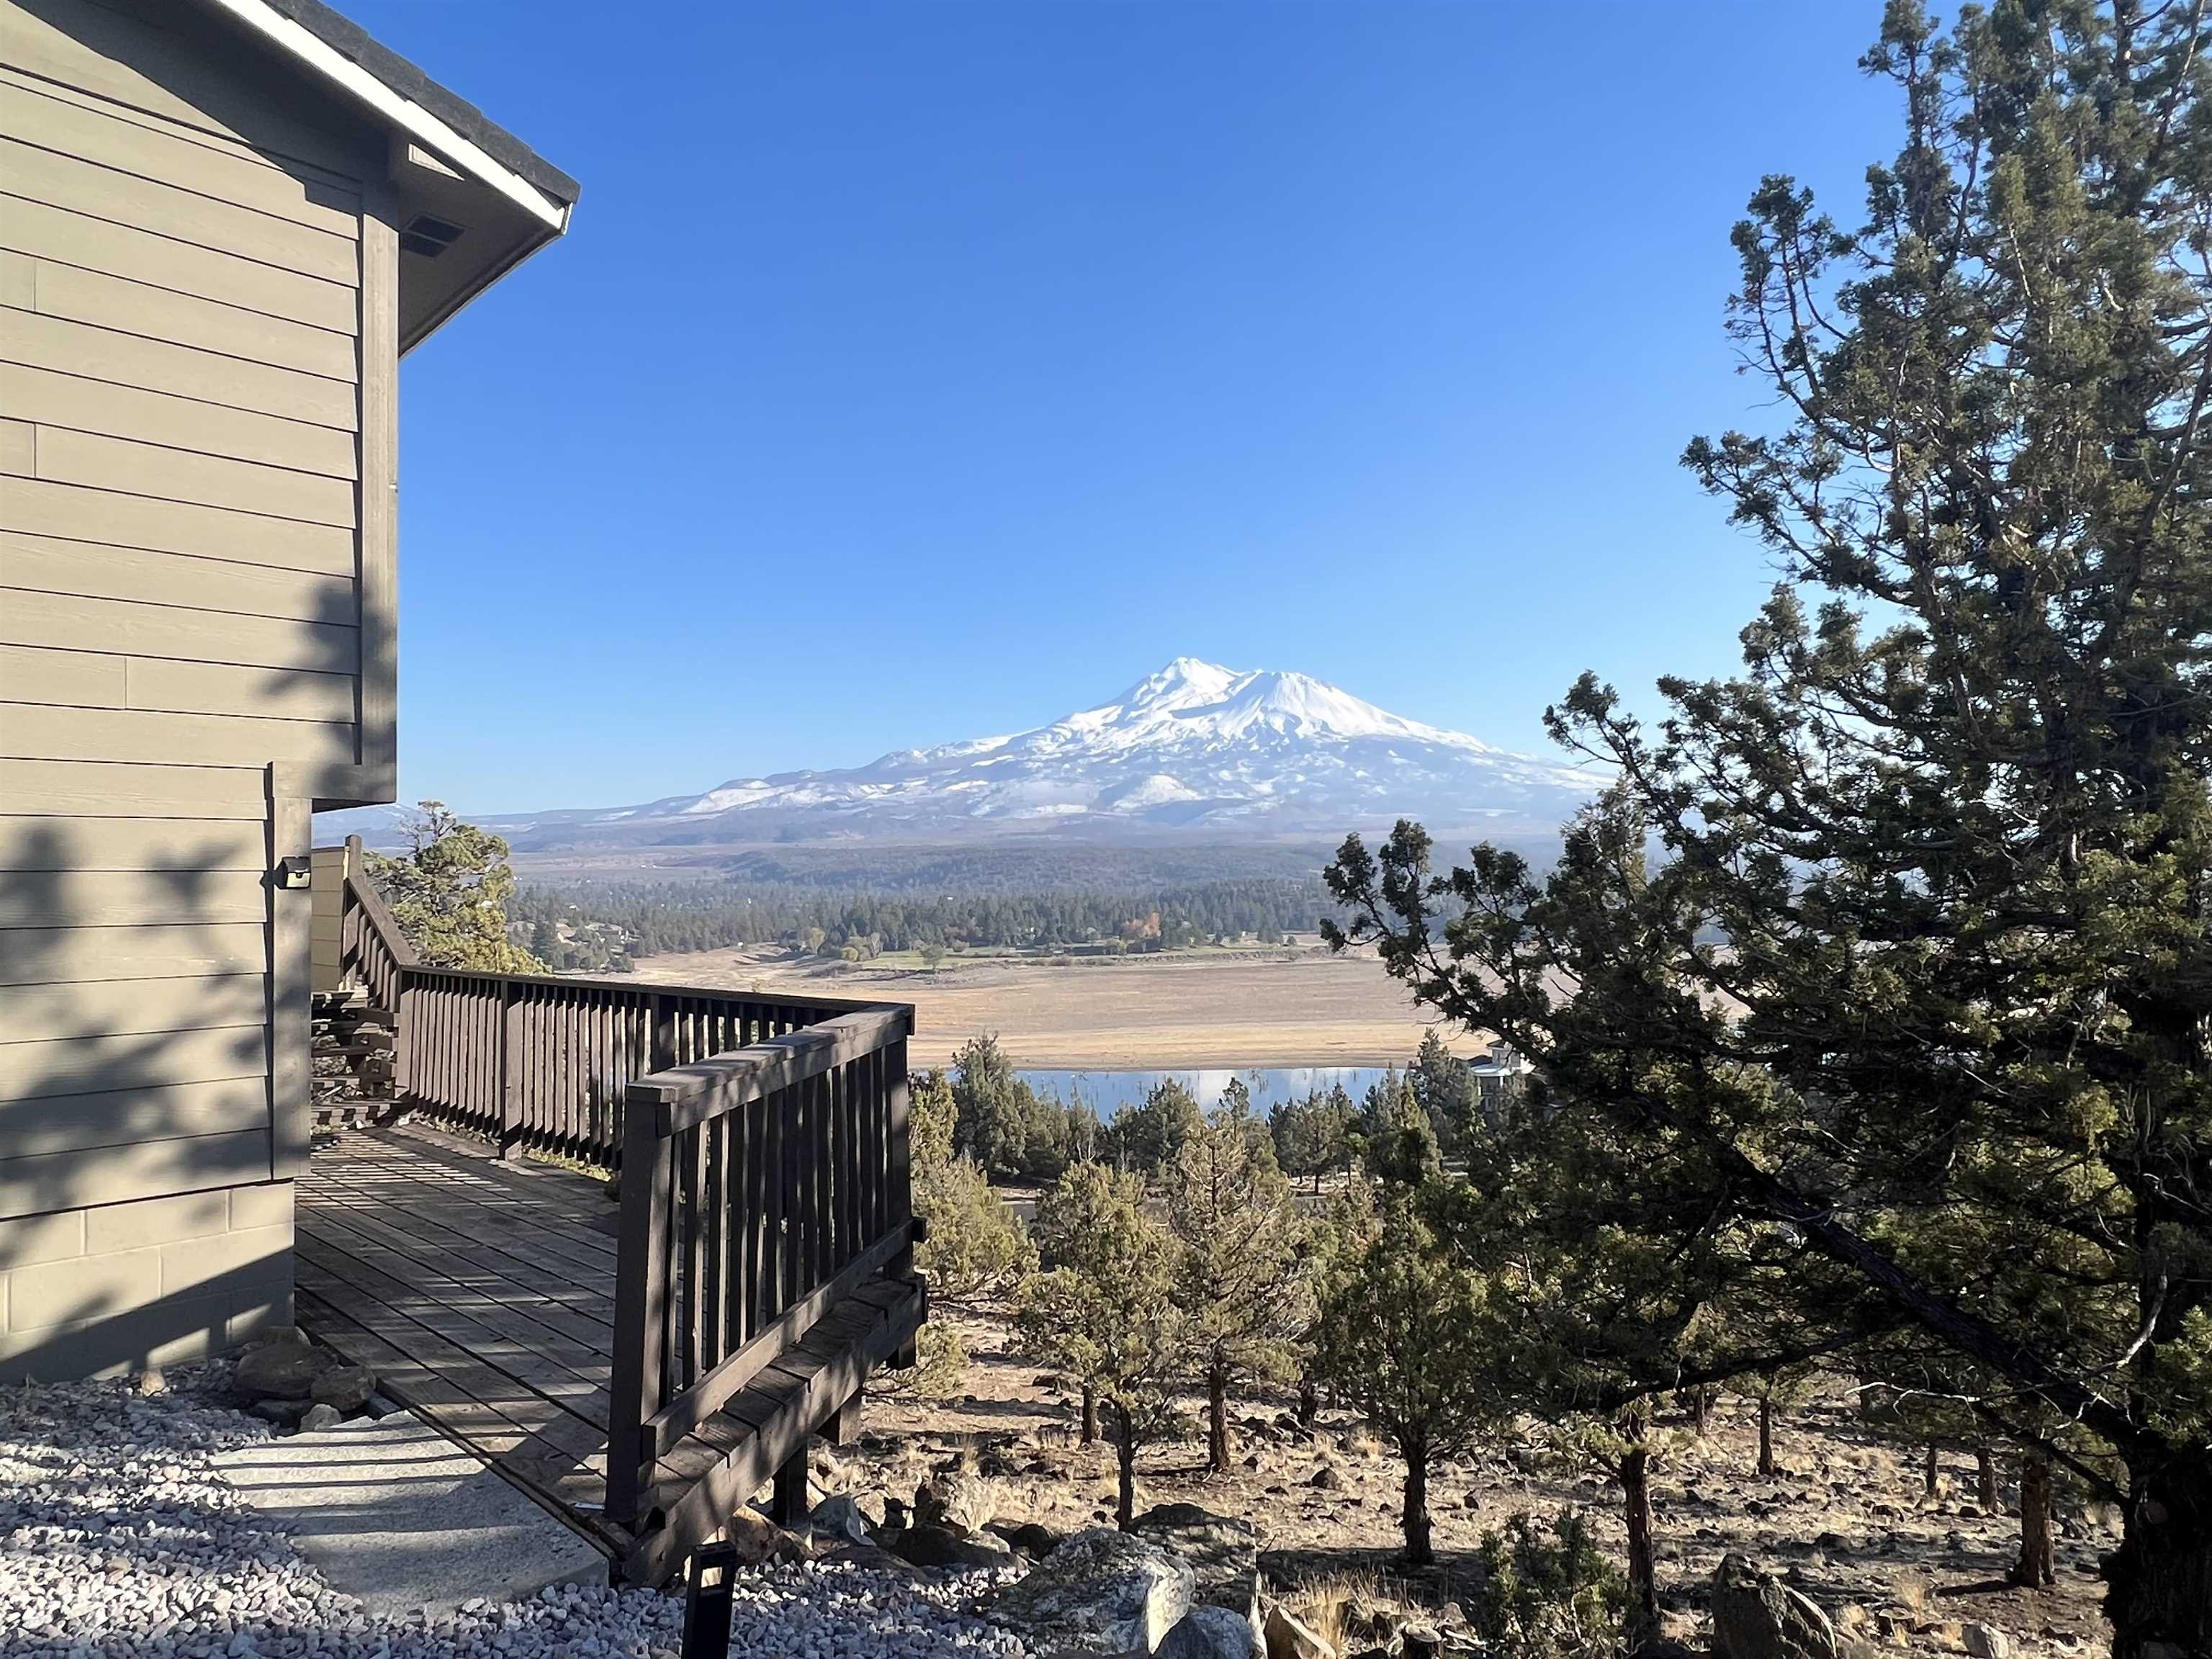 Breathtaking Mt. Shasta views from this contemporary mountain home! A split-foyer welcomes you into the bright home, highlighted by large picture windows and new flooring throughout. Mountain views from 3 bedrooms. A full bathroom on each of the 2 levels makes for a functional layout. The wrap-around deck has 180 degree views of Mt. Shasta, Black Butte, the Eddy's, and Lake Shastina. A small but useable garden with new artificial turf and space for additional outdoor seating has been added in the past year. Plenty of indoor storage. A quick 5 minute drive to Lake Shastina Golf Course and restaurant. Enjoy the quaint nearby town of Mt. Shasta and all the lakes, skiing, waterfalls, and hikes in the area. An hour to Ashland, OR and an easy drive to the Medford airport. Home was previously a vacation property, lots of opportunity! Nestled into a peaceful neighborhood with acres of land between homes and private boat launch access to Lake Shastina. Option to purchase partially-furnished. Imagine sipping your morning coffee while taking in the epic views!